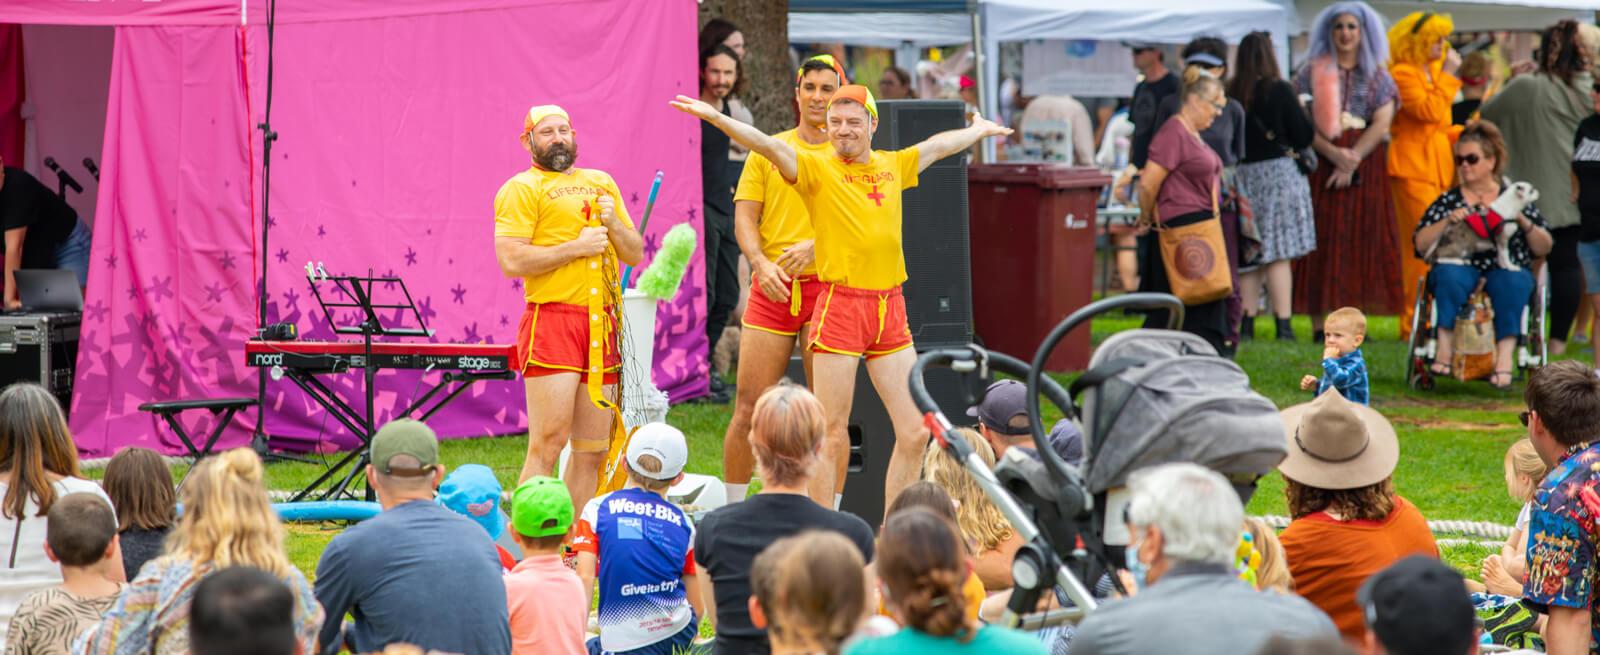 Three happy and celebratory circus artists dressed as lifeguards presenting to a seated audience on grass